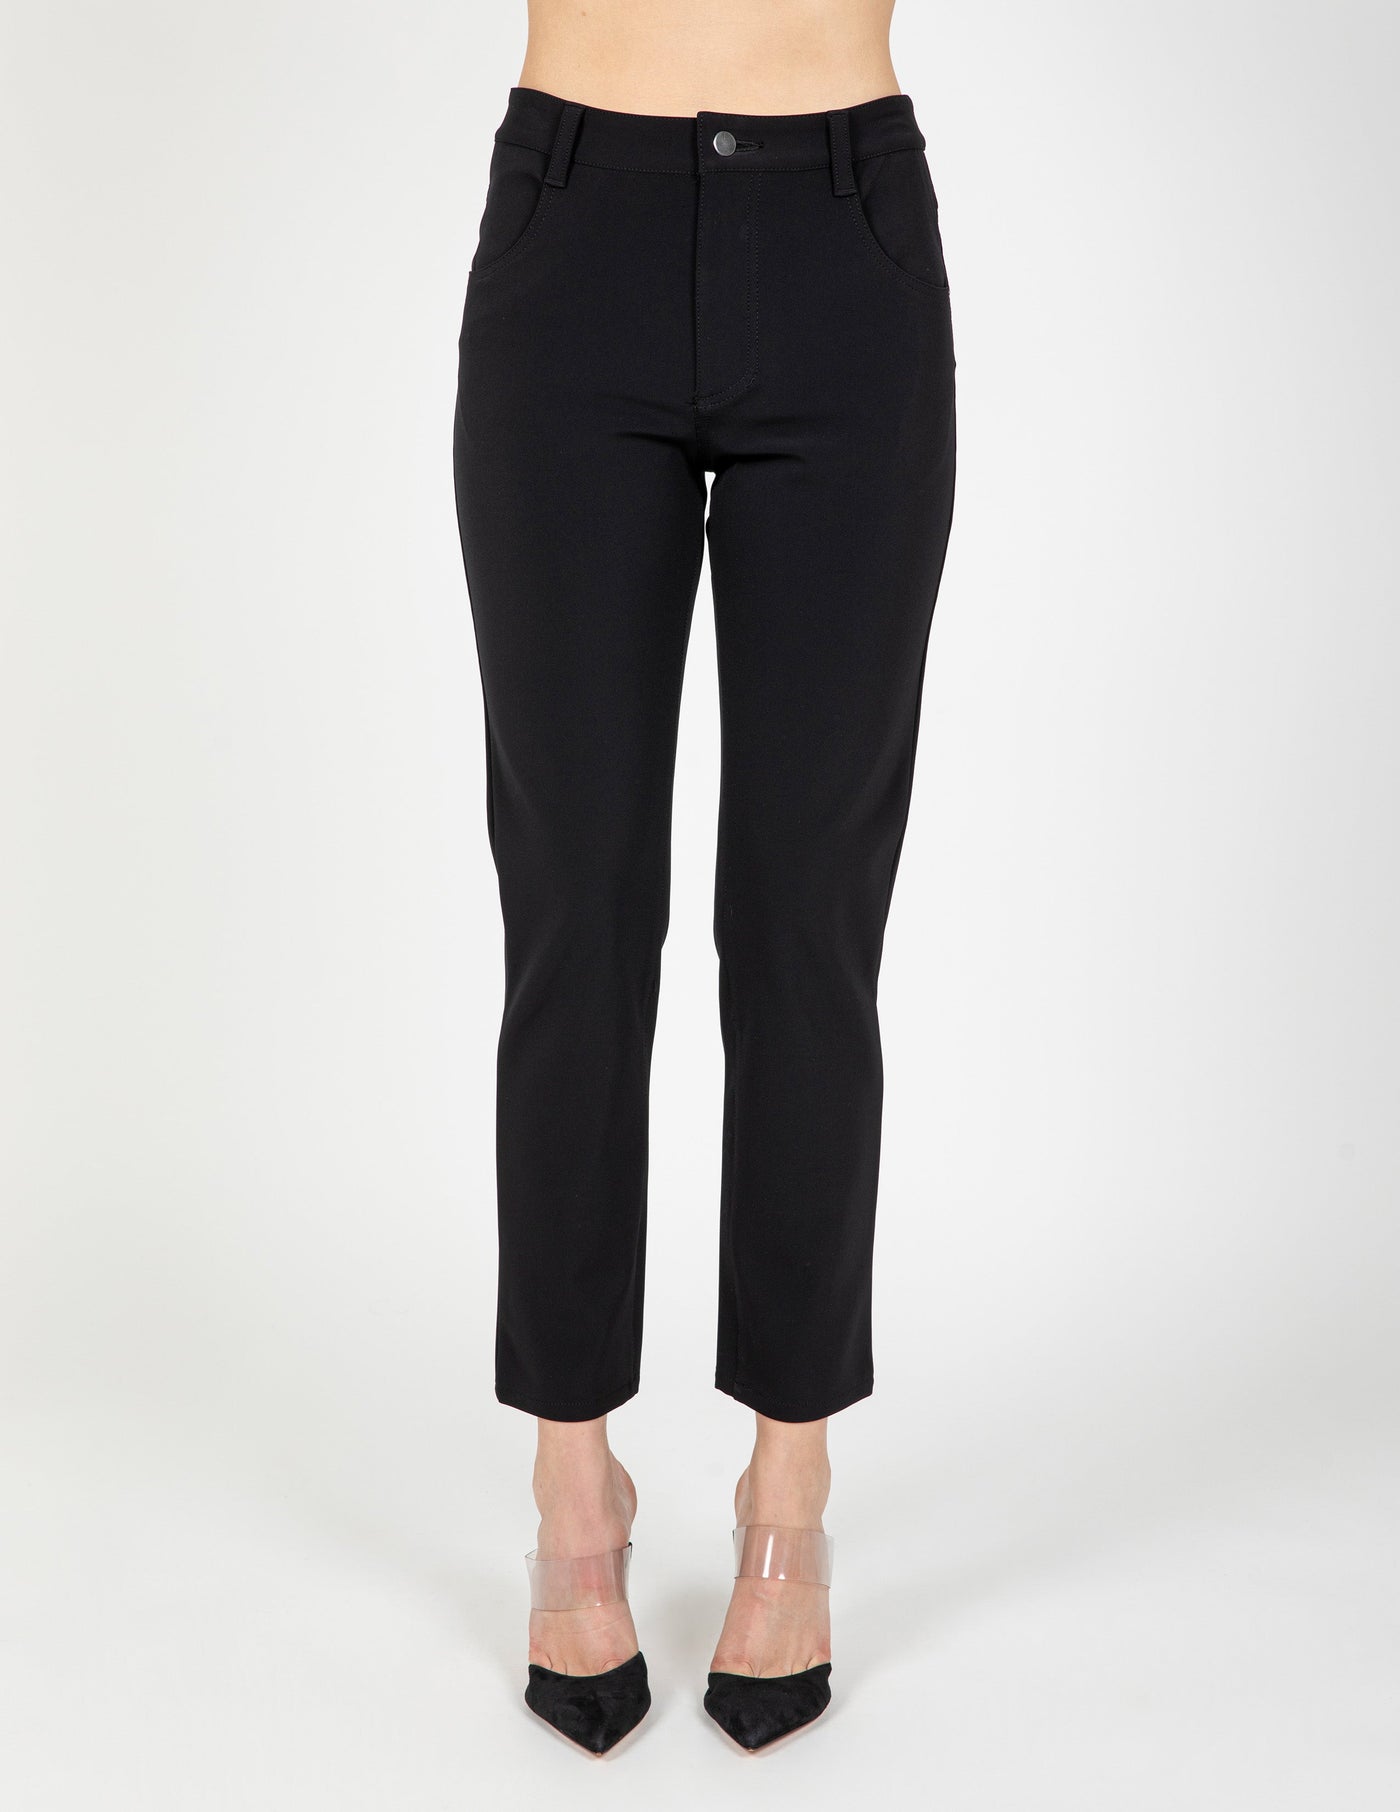 Miracle Stretch 4 Pocket Jean in Black